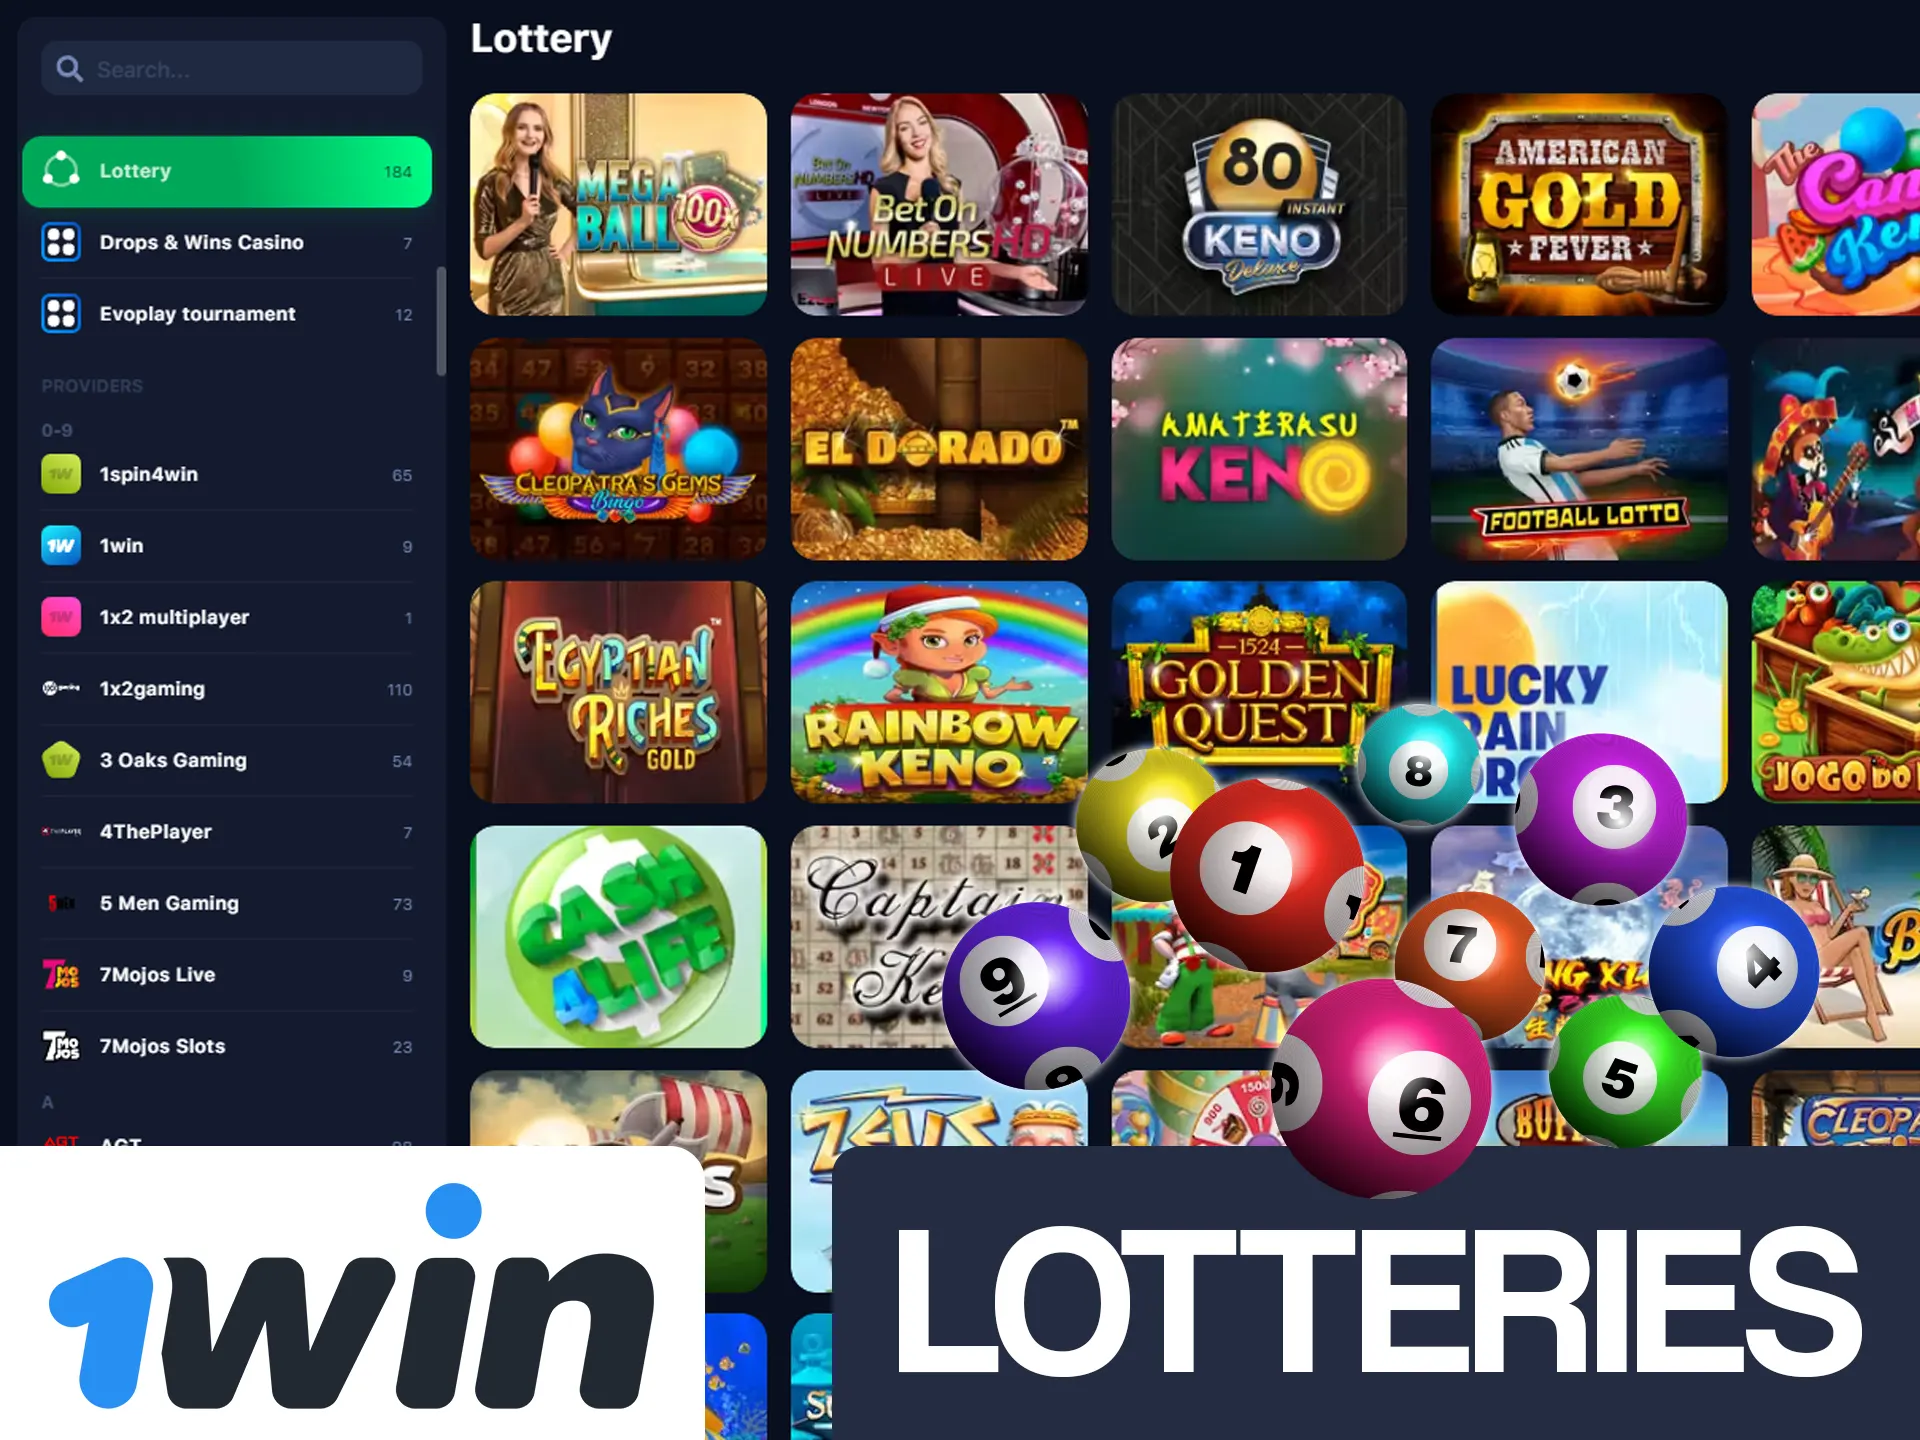 Make a lot of money by playing 1win lotteries.